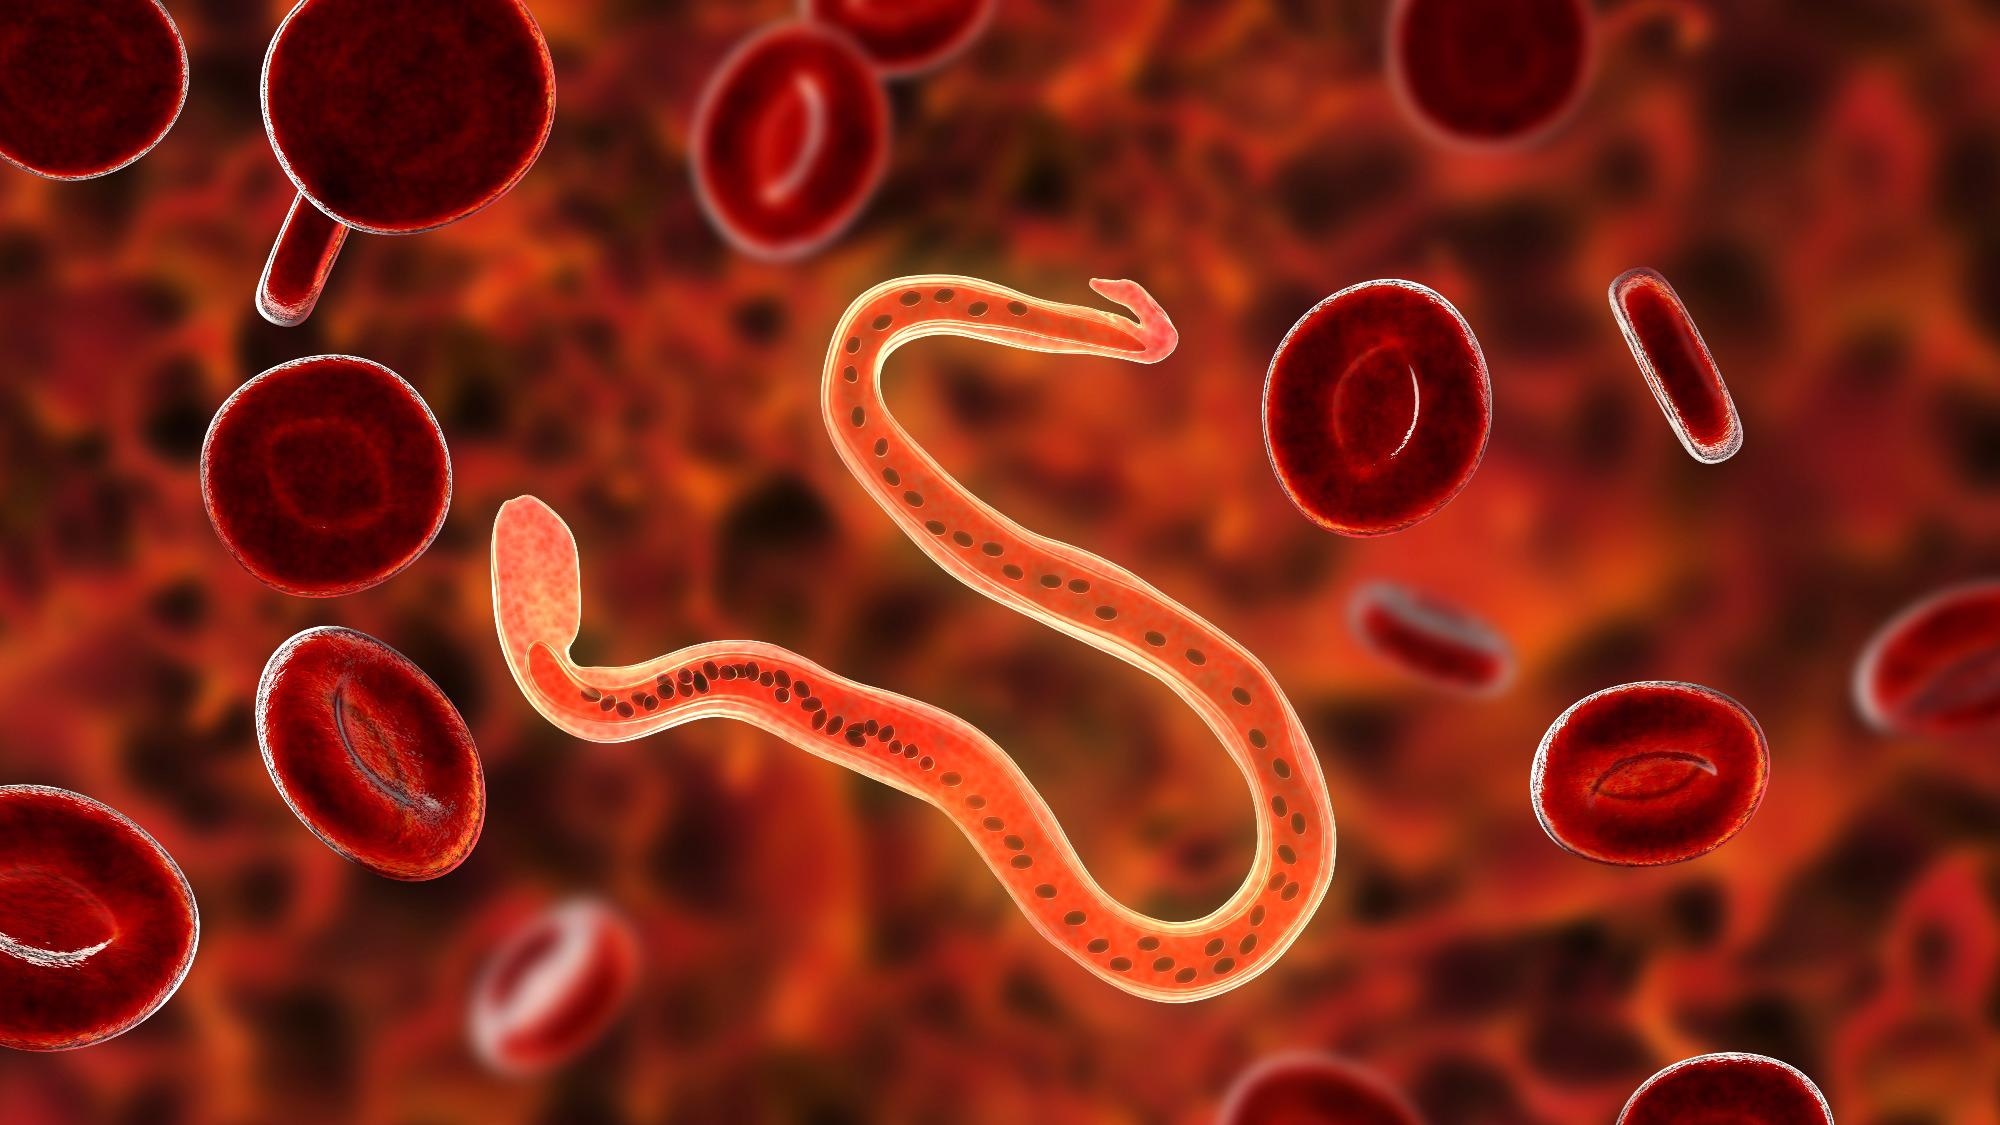 Wuchereria bancrofti, a roundworm nematode, one of the causative agents of lymphatic filariasis. Image Credit: Kateryna Kon / Shutterstock